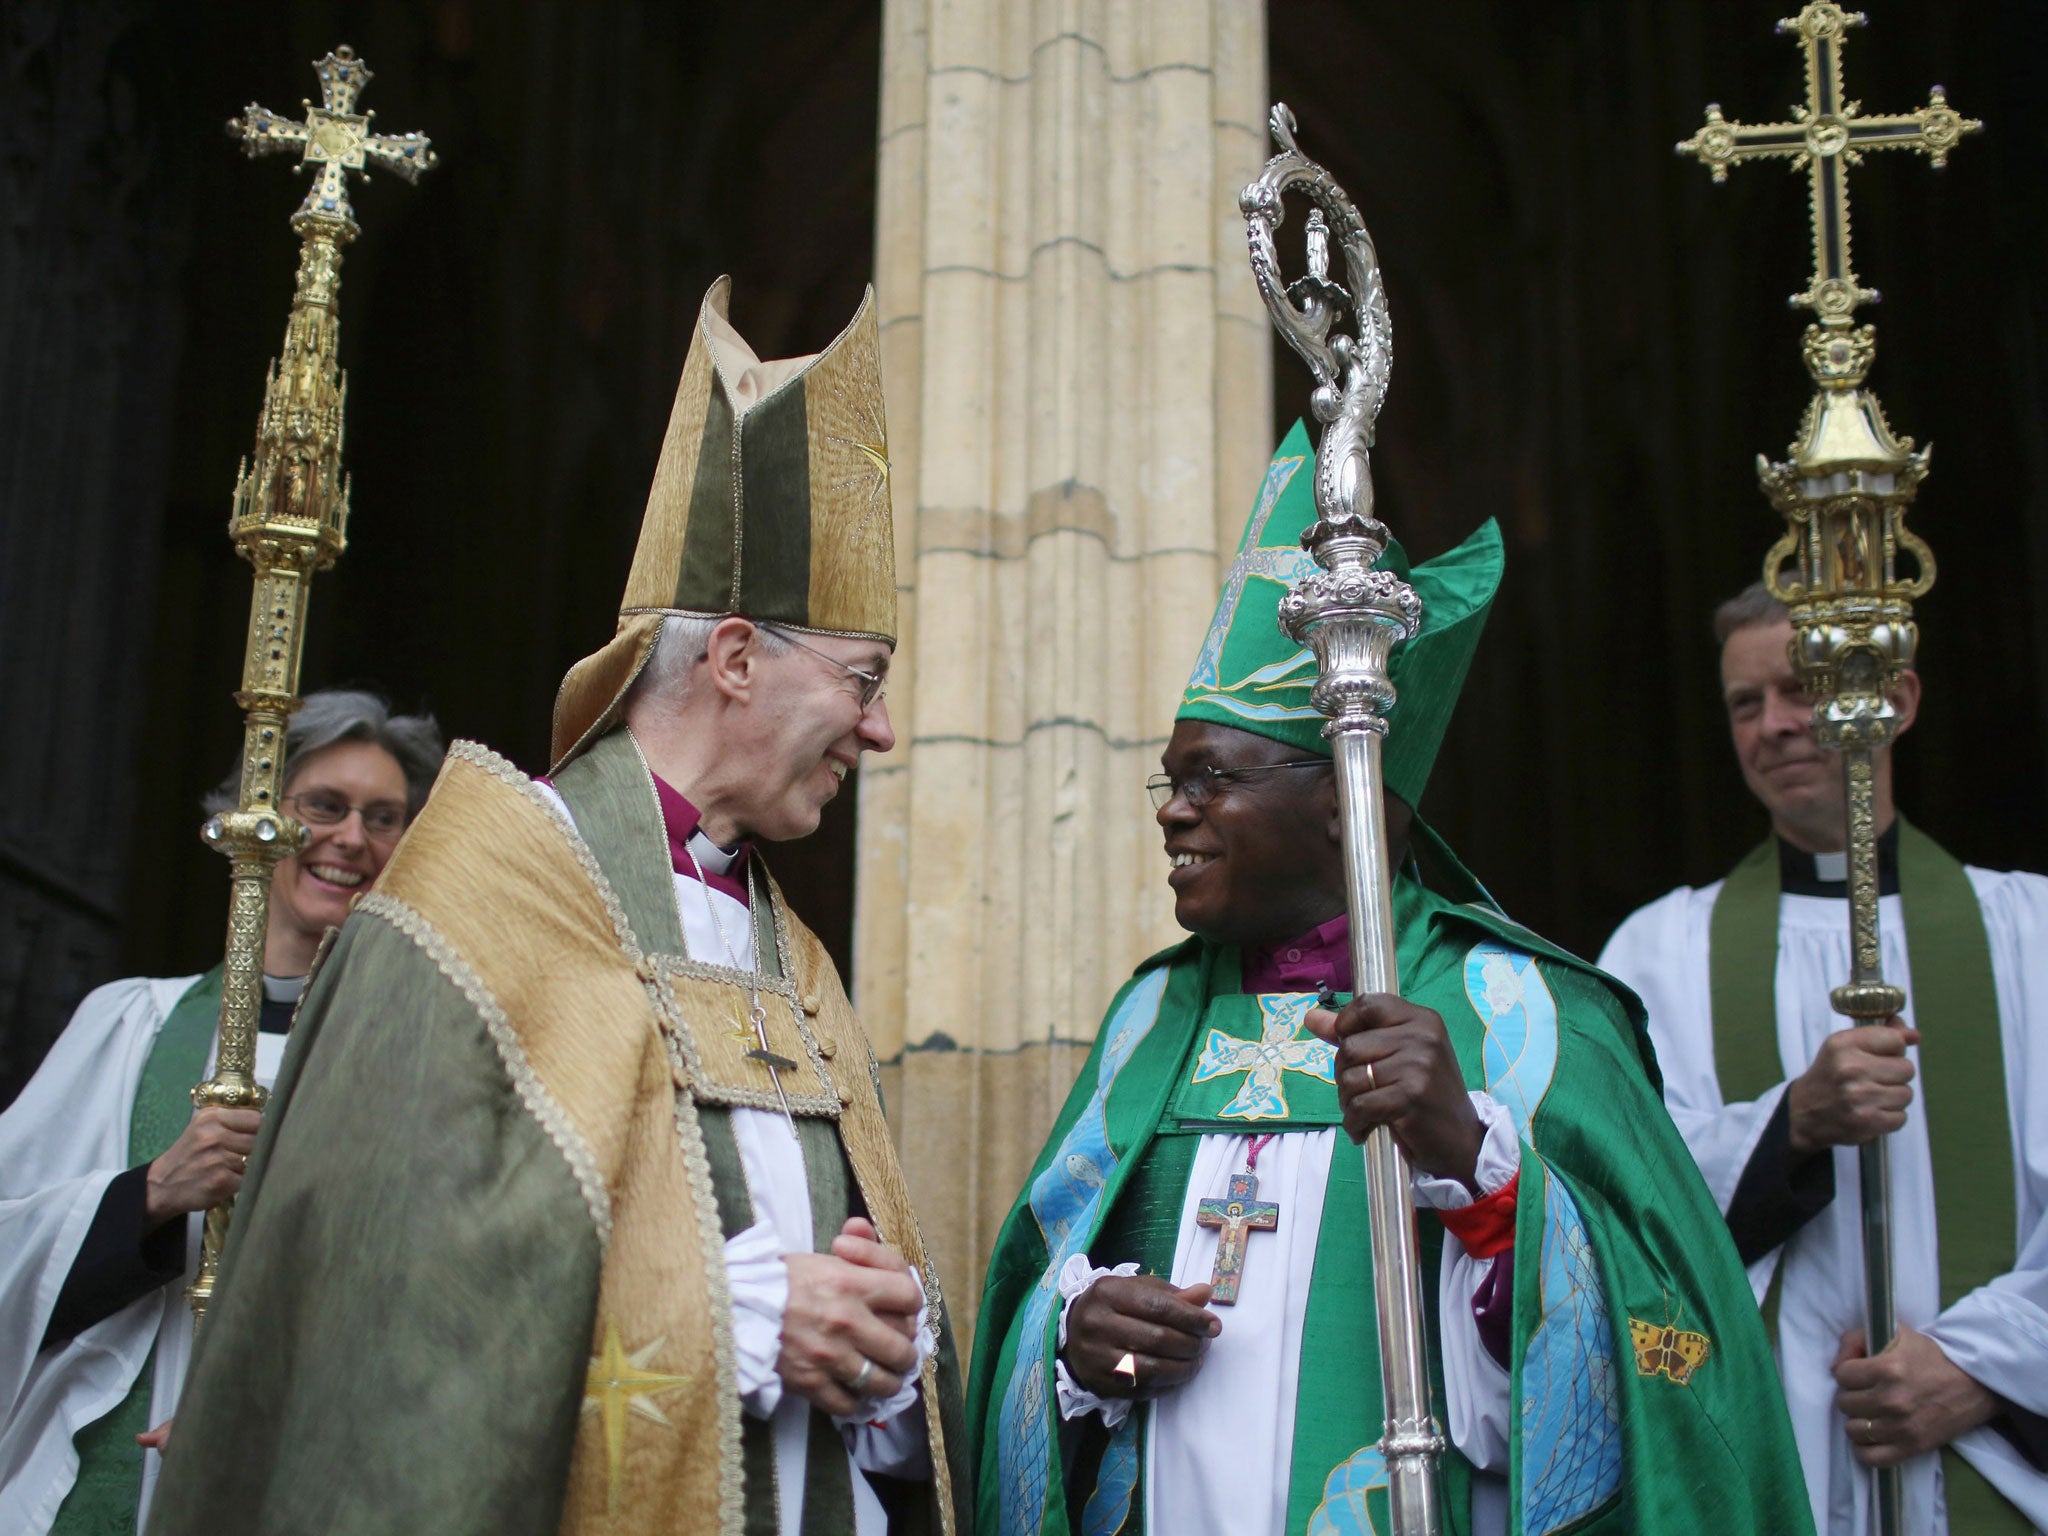 The Archbishop of York John Sentamu (R) and the Archbishop of Canterbury Justin Welby chat on the steps of York Minster after a Eucharist Service on July 13, 2014 in York, England